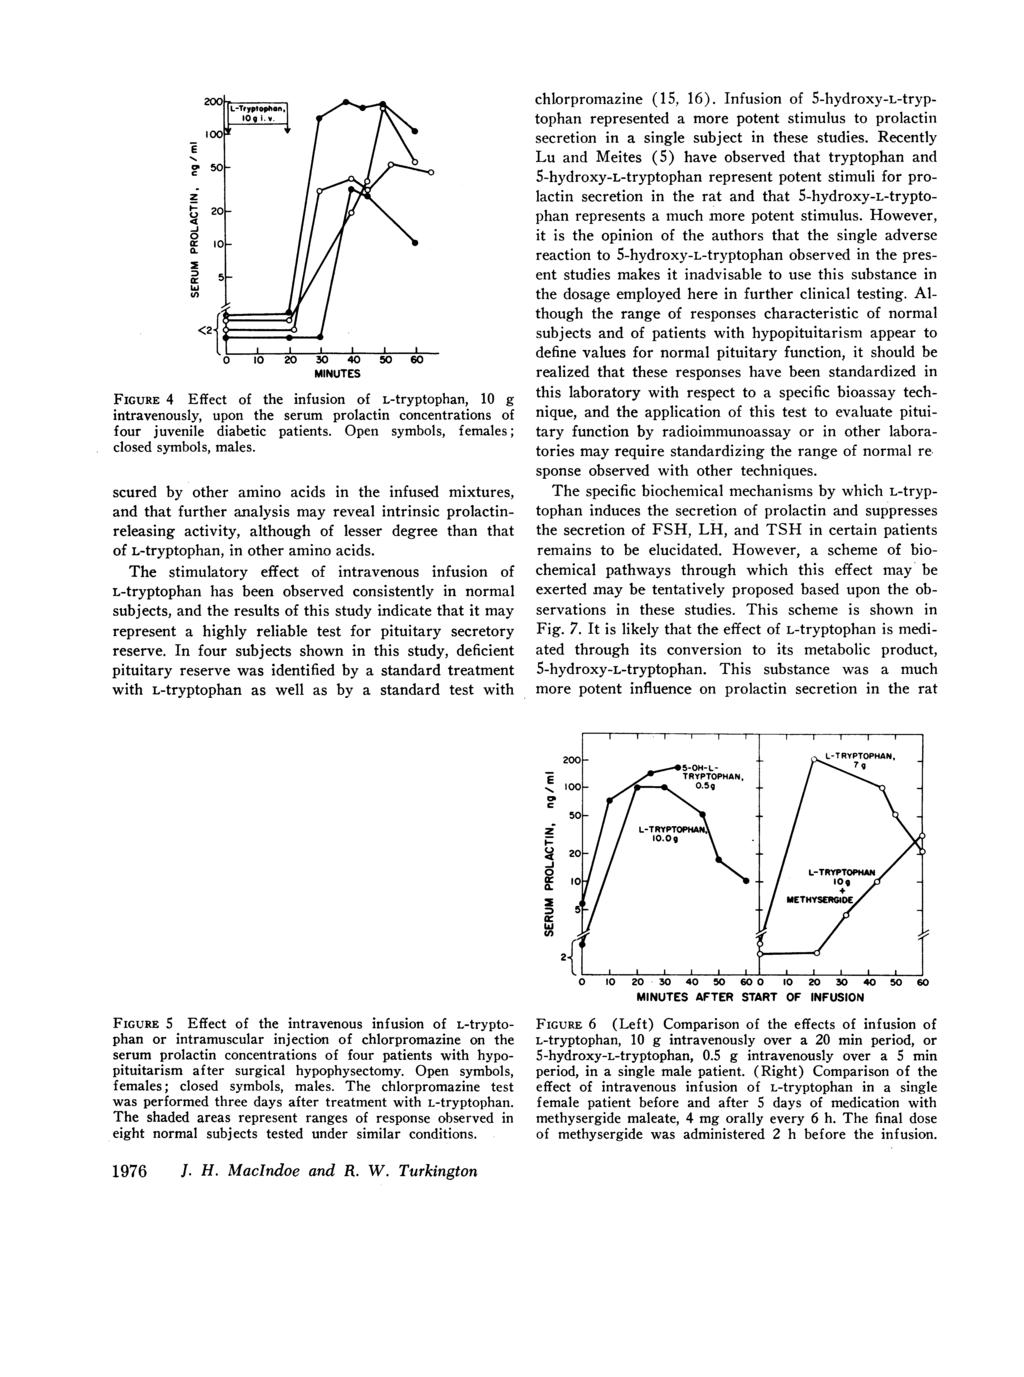 50 1 -J 0 C. FU E Cr 5- U) 0 20 30 40 50 60 FIGURE 4 Effect of the infusion of L-tryptophan, g intravenously, upon the serum prolactin concentrations of four juvenile diabetic patients.